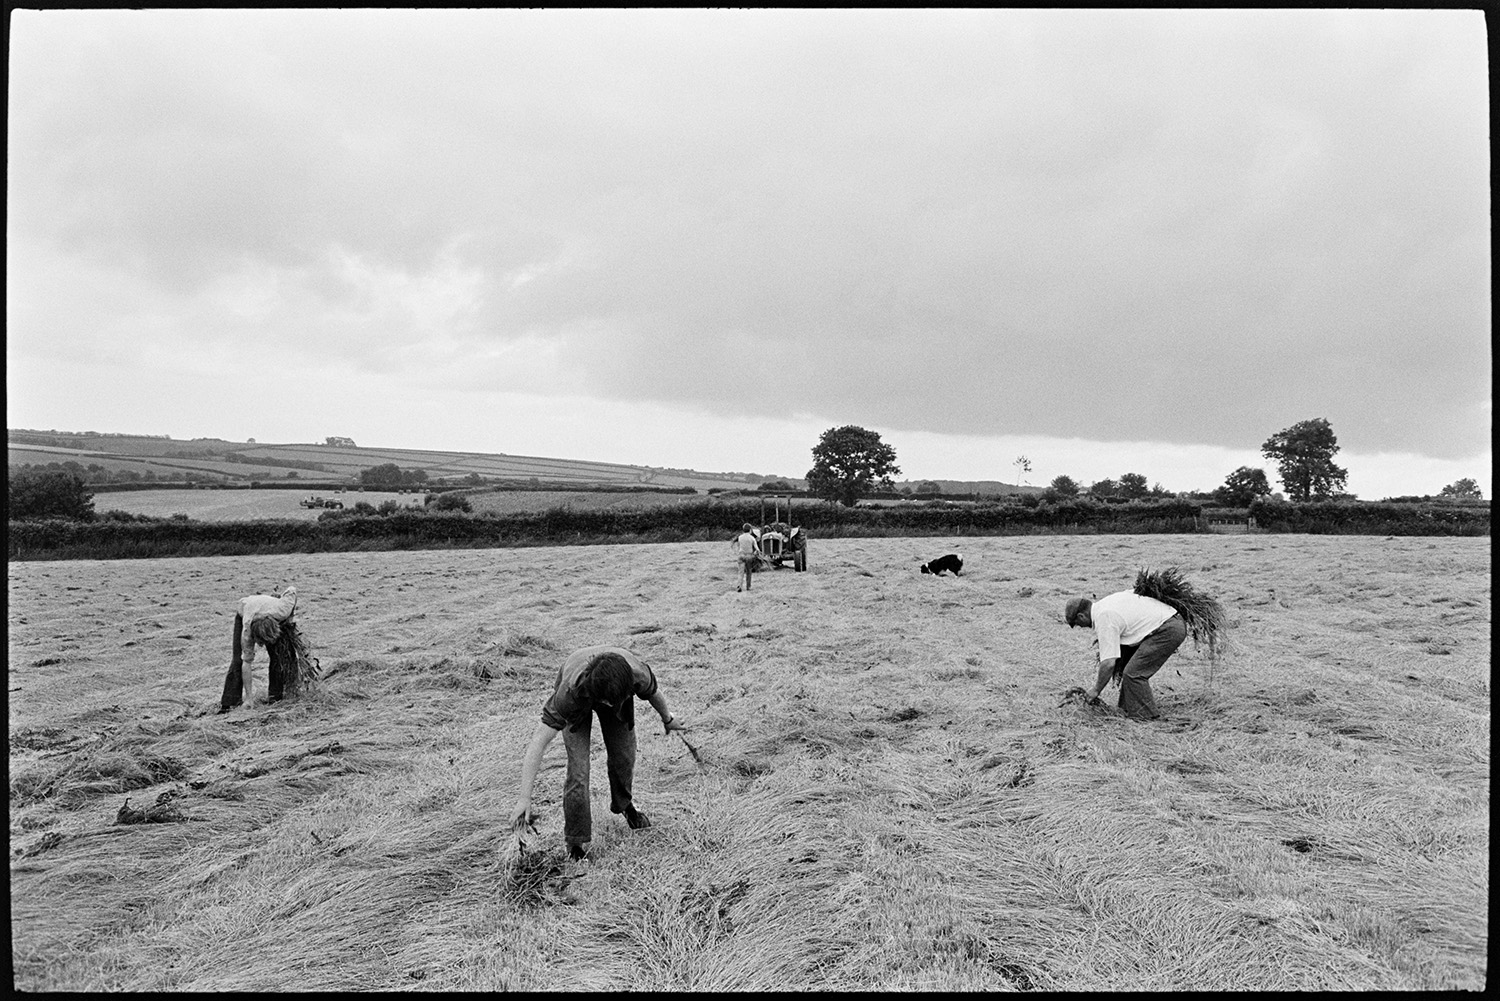 Men removing thistles from cut hay.
[Four people picking thistles out of cut hay lying on the ground in a field at Ashreigney. A tractor and a dog are also in the field. In the background the surrounding fields  can be seen.]